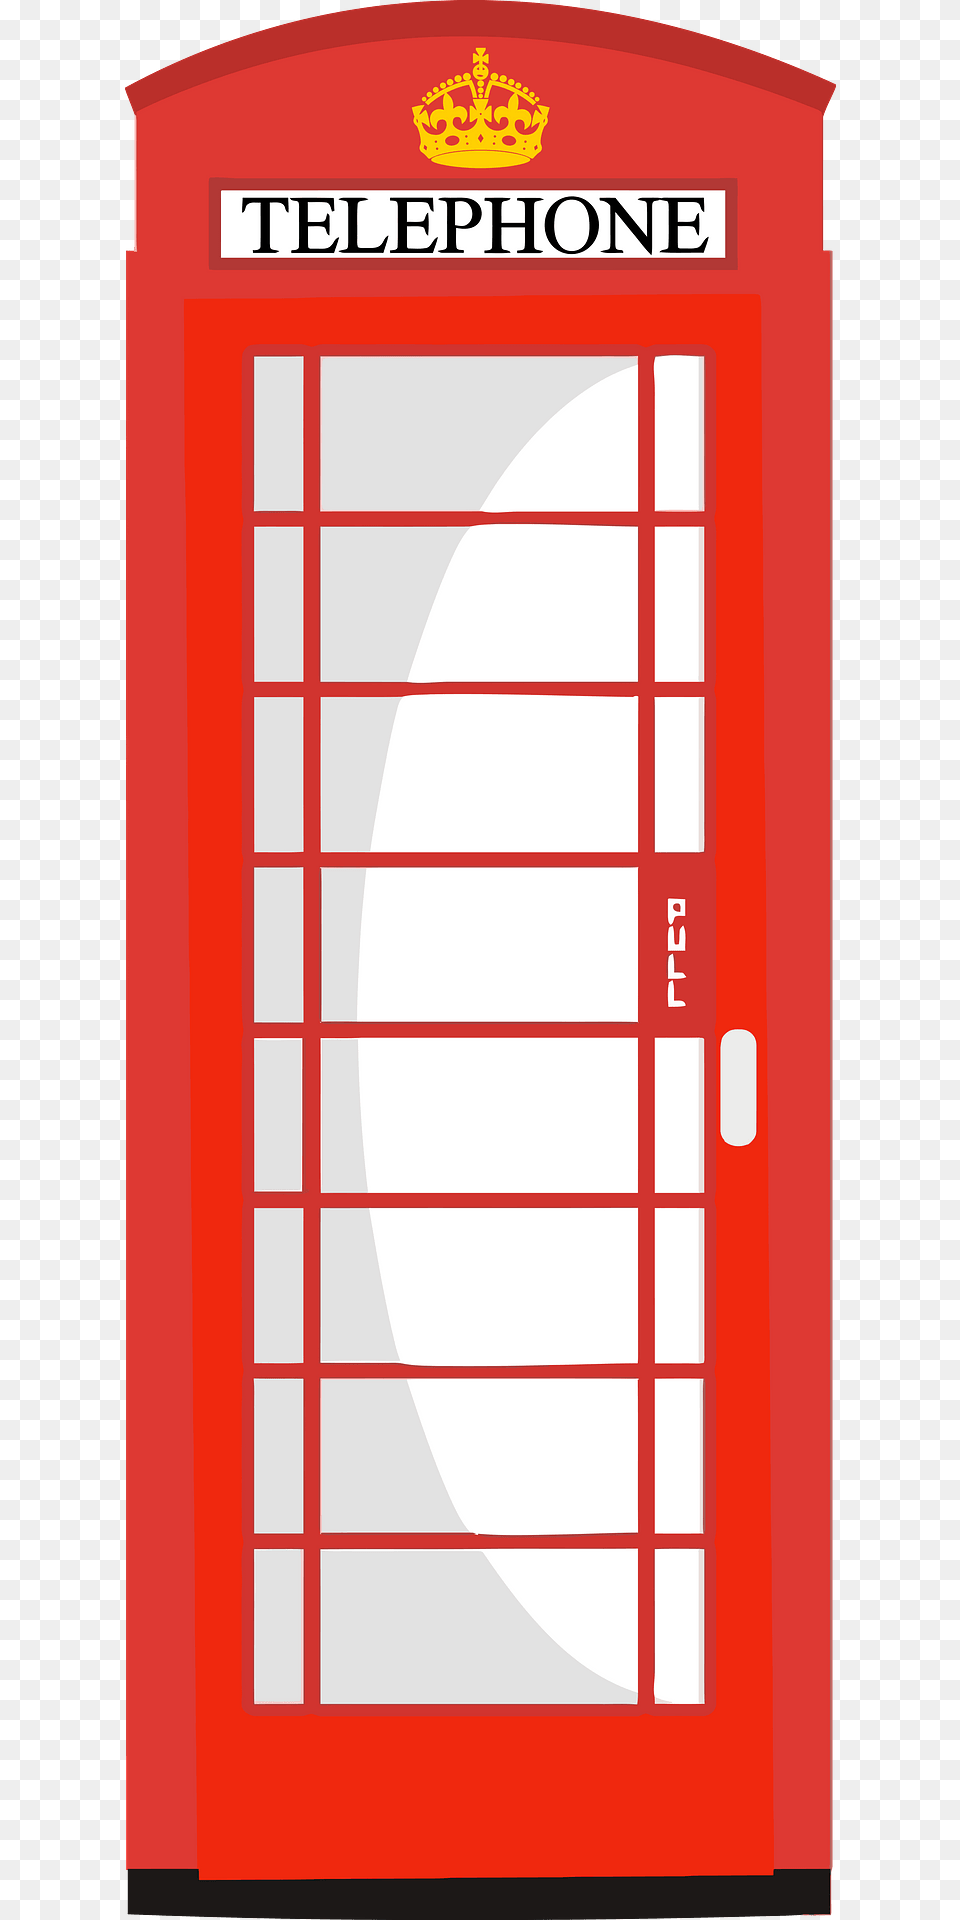 Telephone Booth Clipart, Phone Booth Png Image